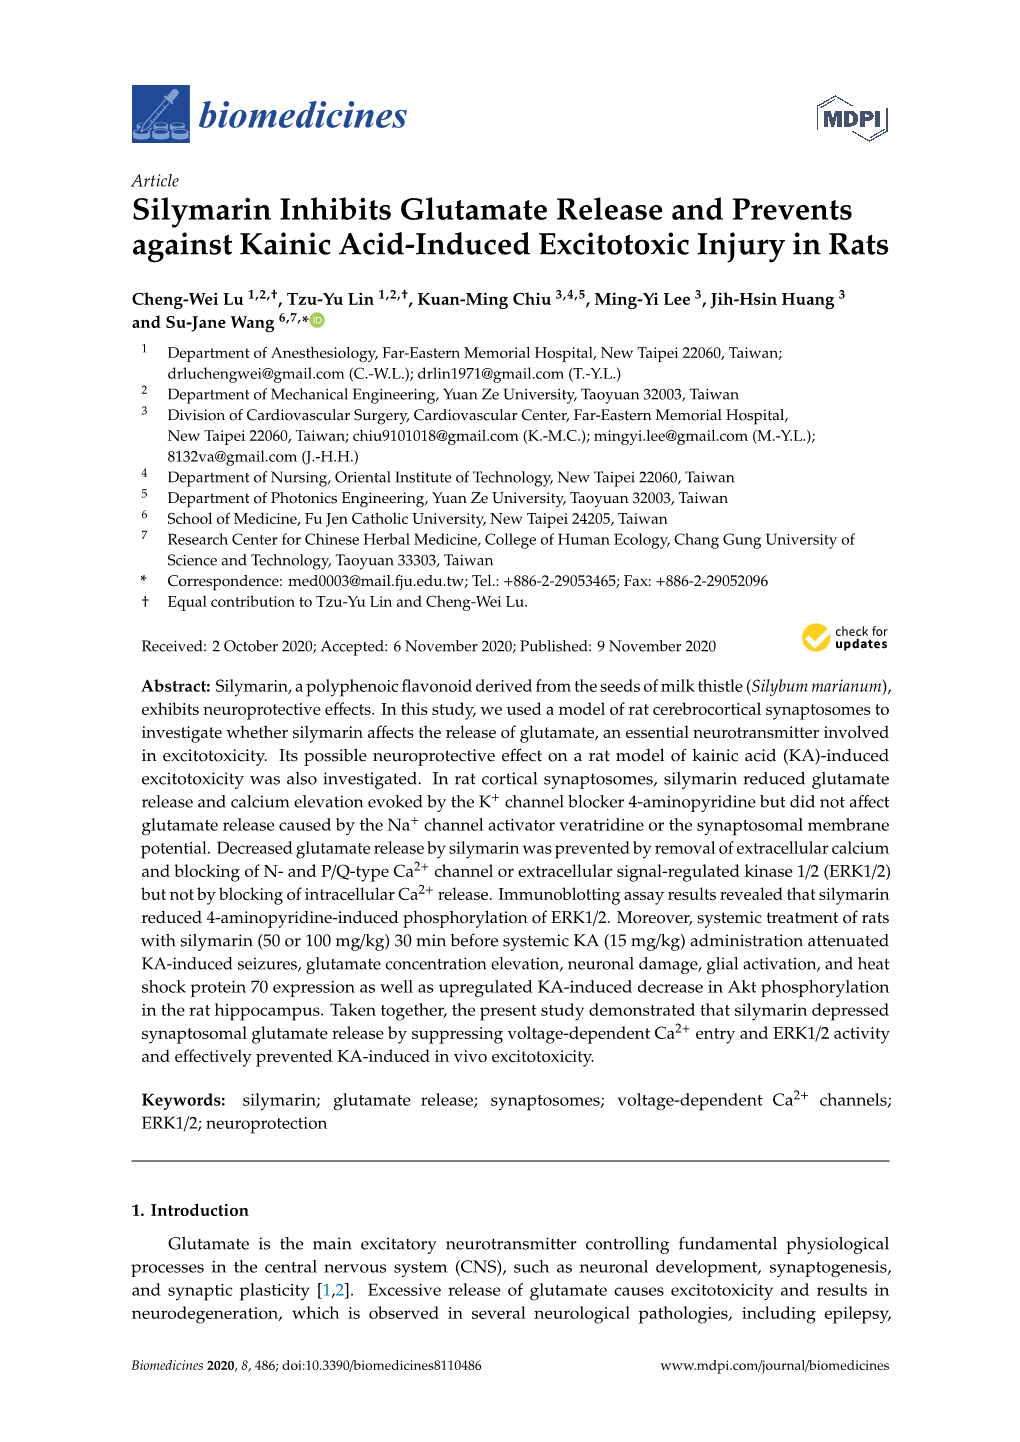 Silymarin Inhibits Glutamate Release and Prevents Against Kainic Acid-Induced Excitotoxic Injury in Rats